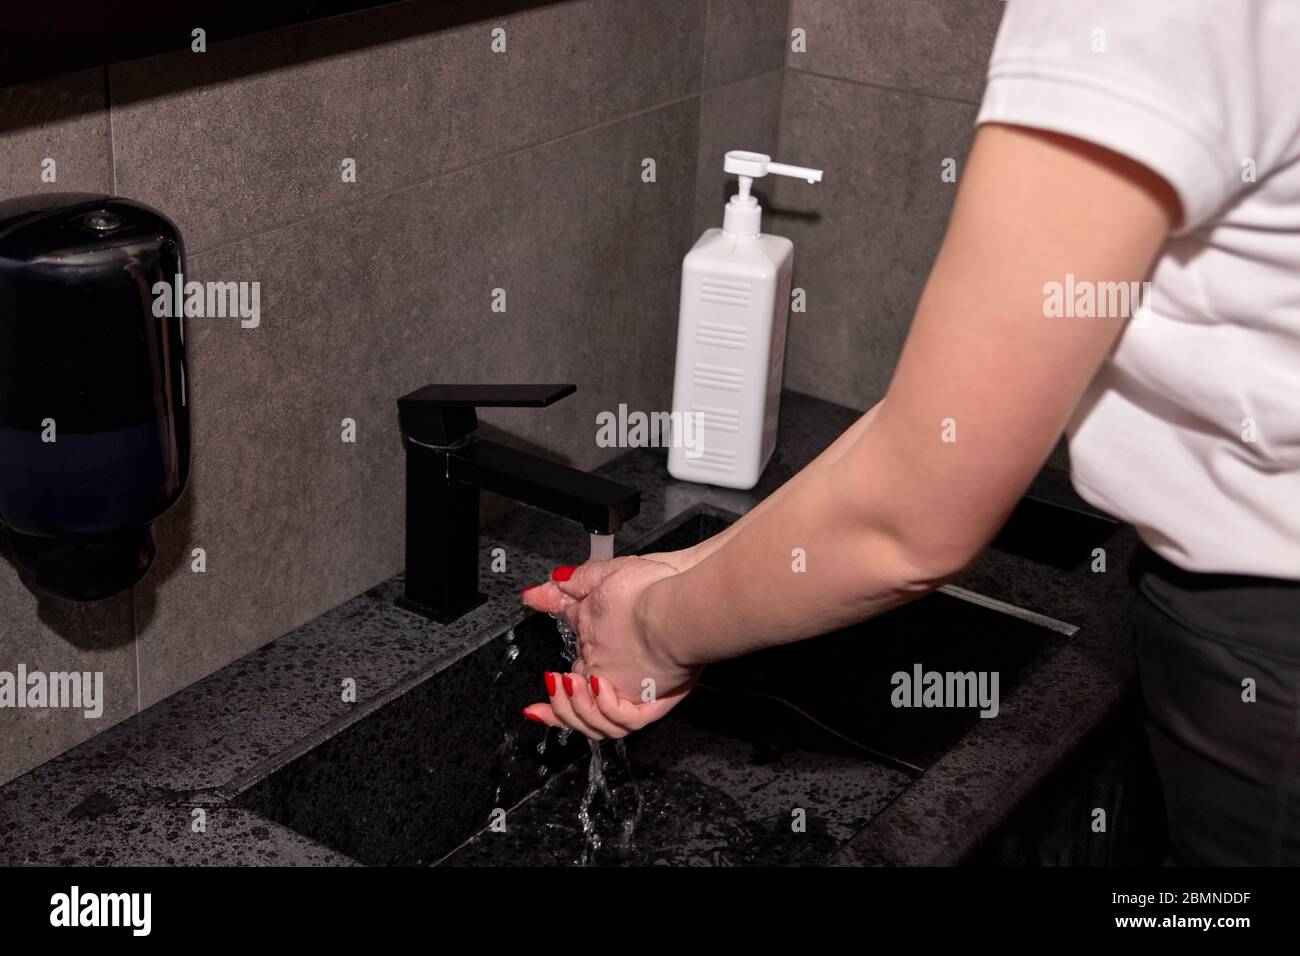 Woman washing hands for virus pandemic prevention, wetting hands with running water. Stock Photo